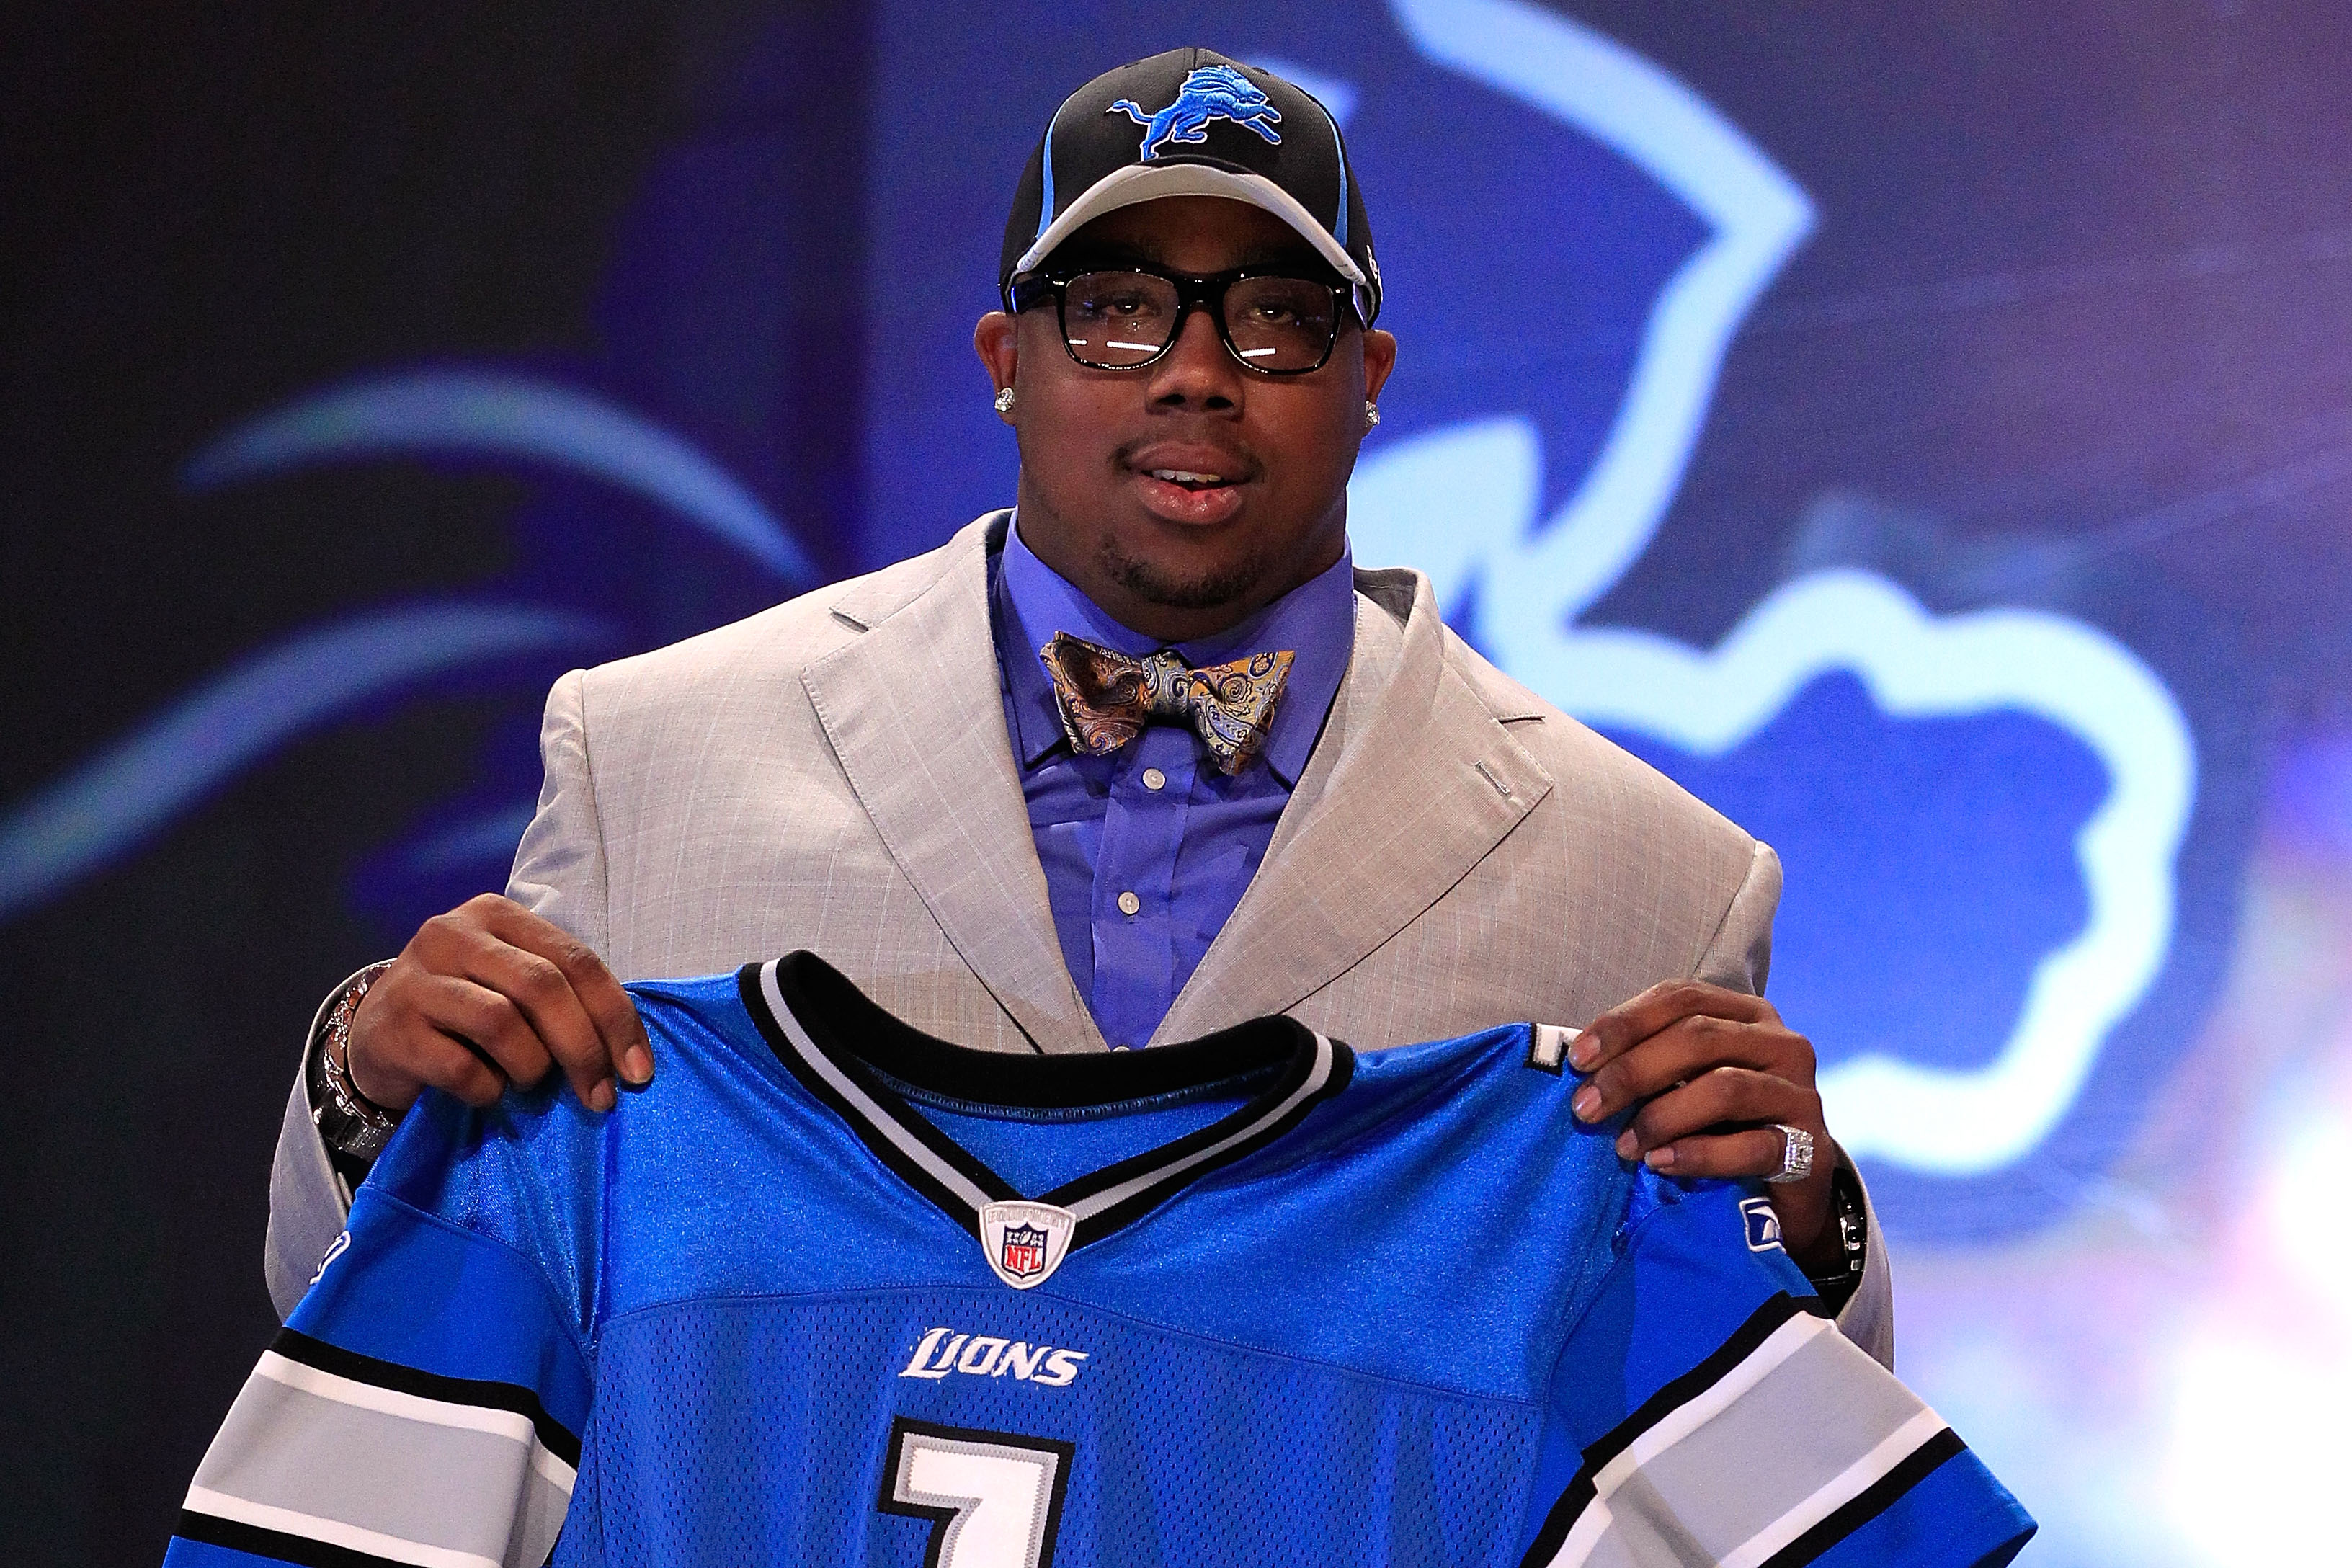 Mr. Fairley, you, my friend, are the NFL draft's prom king.